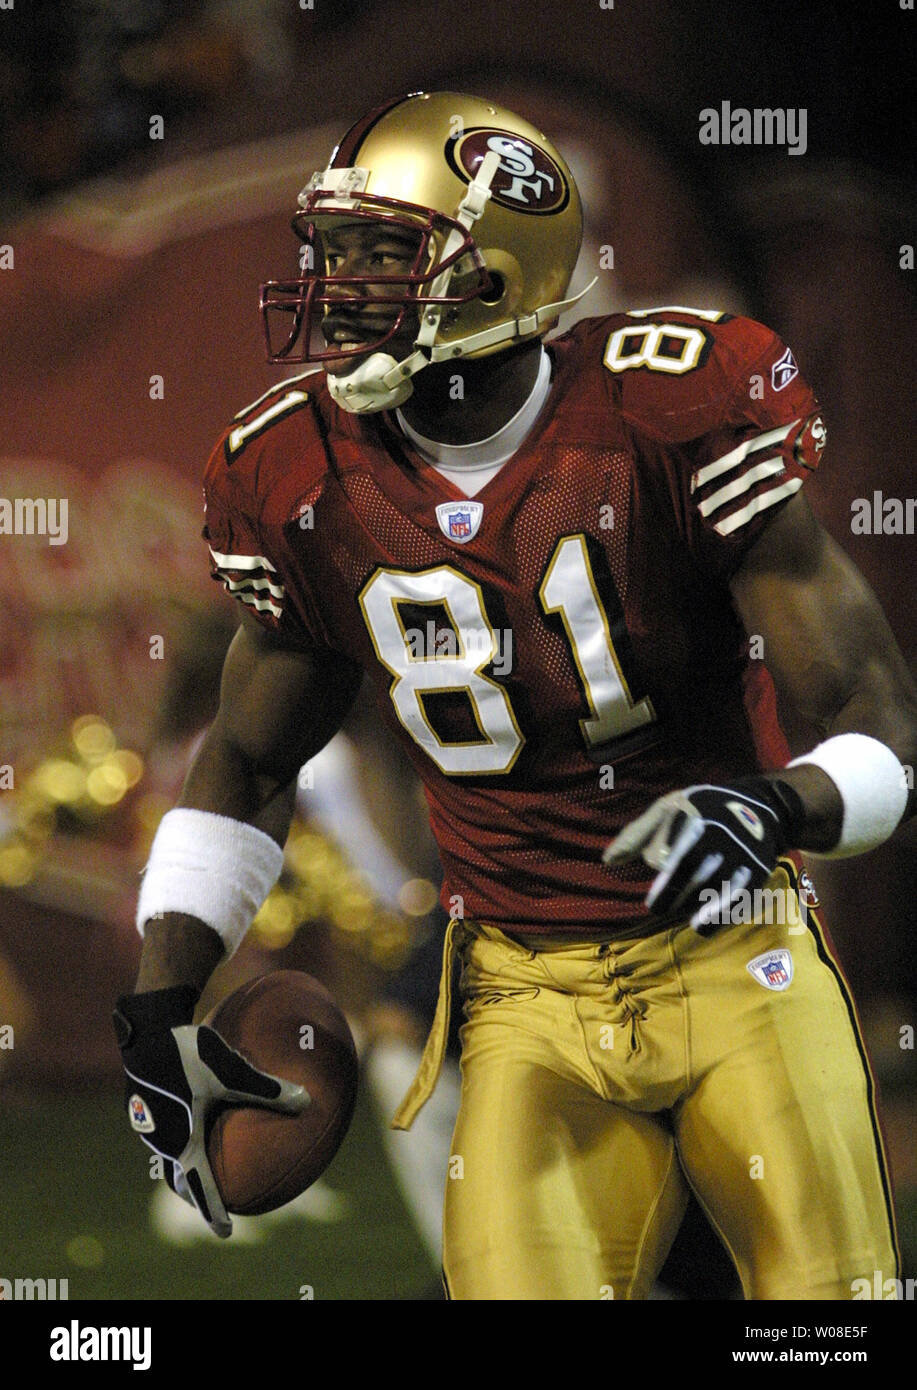 San Francisco 49ers wide receiver Terrell Owens turns to look at the Pittsburgh Steelers after racing 61 yards with a Tim Rattay pass for a first quarter TD in San Francisco, November 17, 2003. The 49ers defeated the Steelers 30-14.   (UPI Photo/Bruce Gordon) Stock Photo